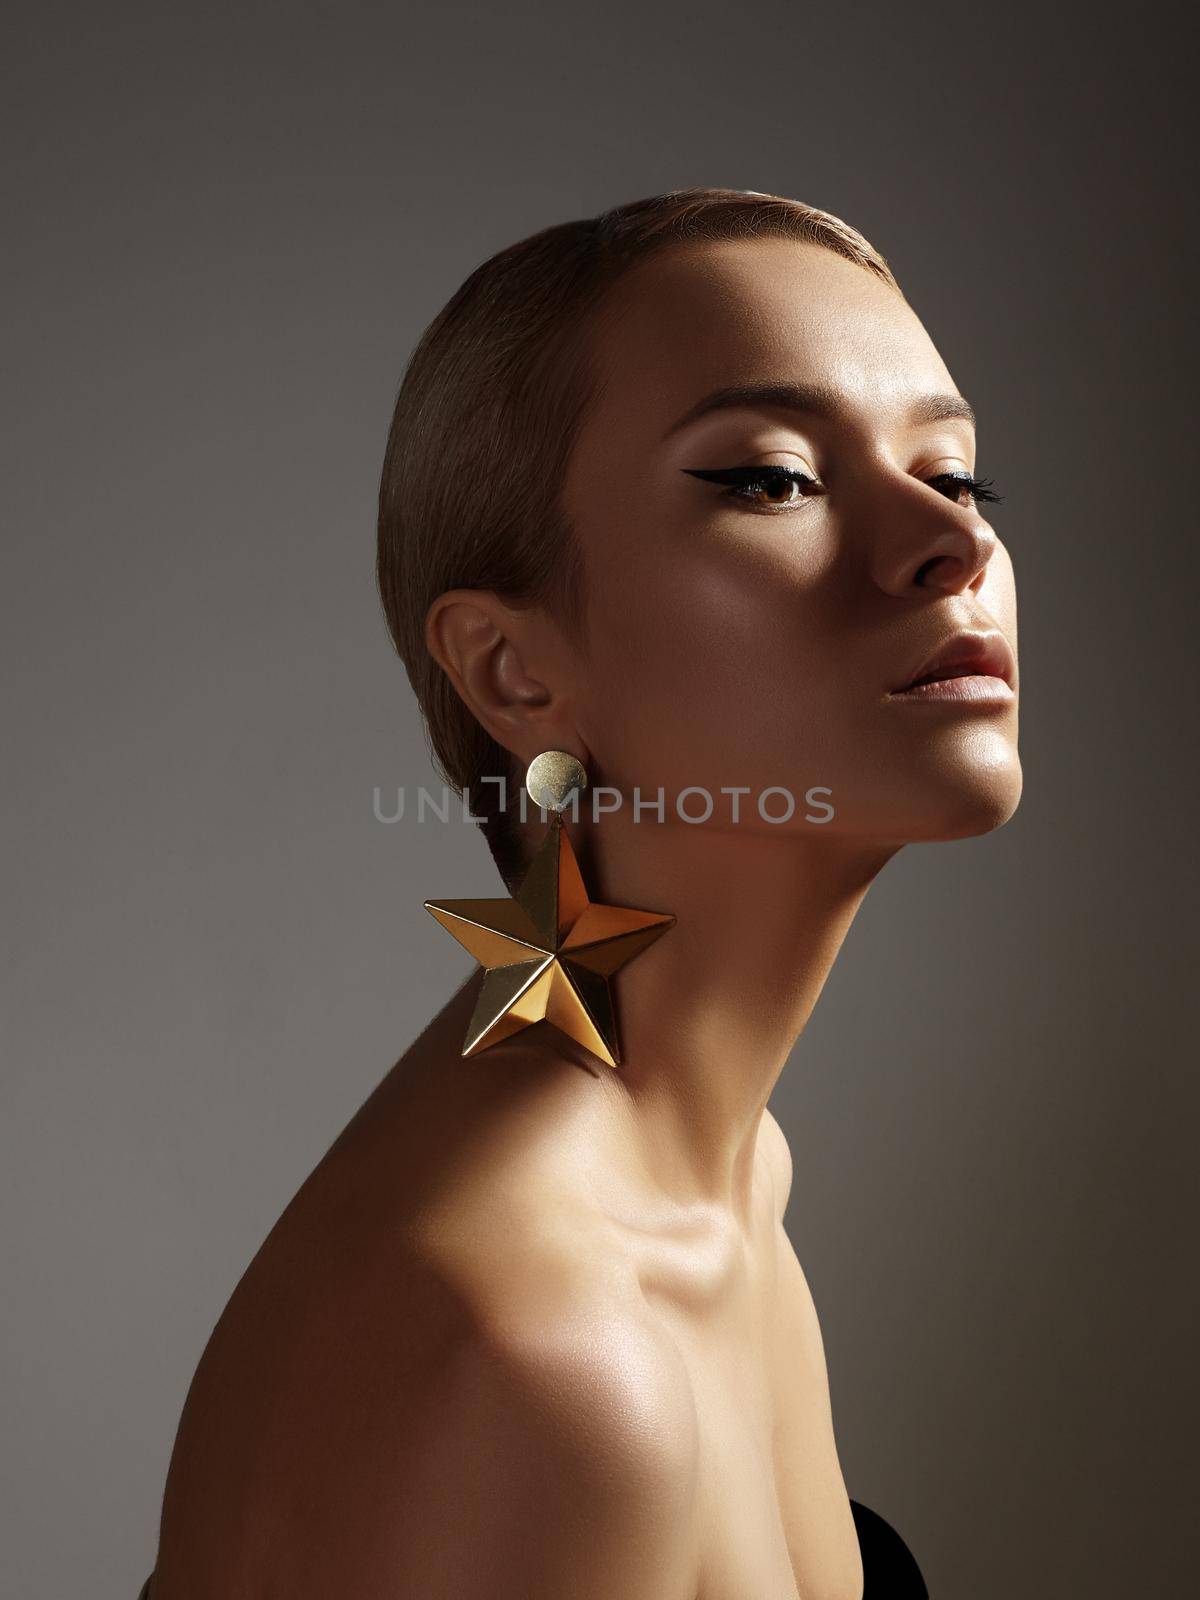 Beauty with Pure Skin on Grey Background with Luxury Accessories. Beautiful Woman Model in Femininity Pose with Fashion Celebratory Make-up, Sleek Hairstyle and Gold Earrings